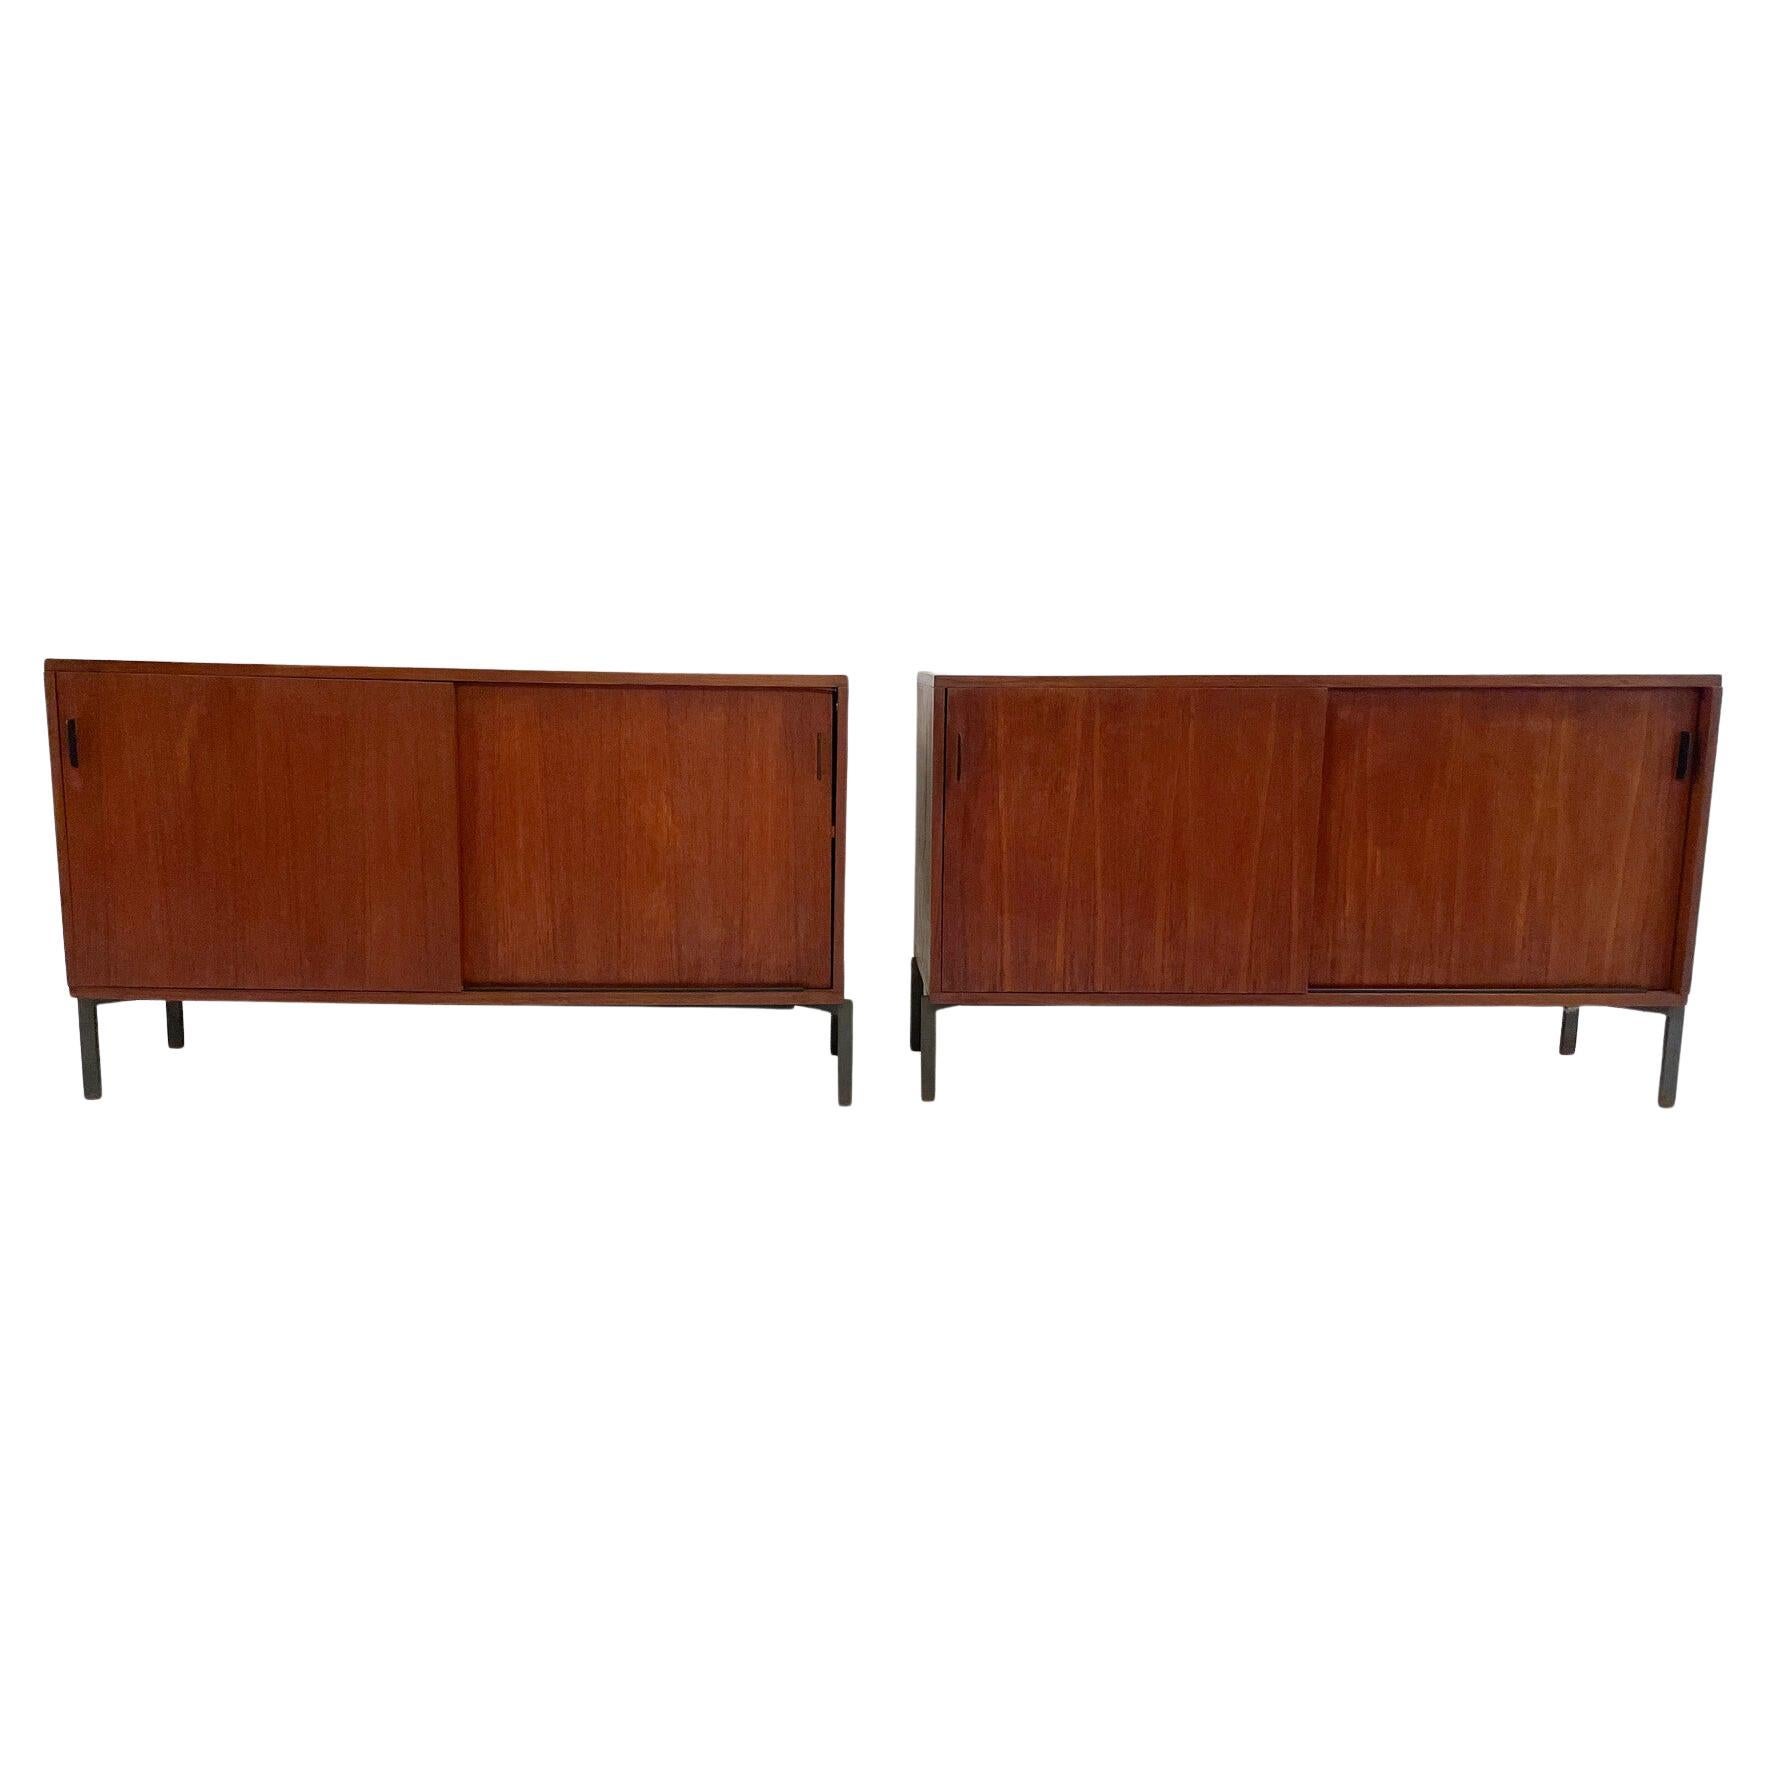 Mid-Century Modern Sideboard, Wood, Germany, 1960s - 2 Available